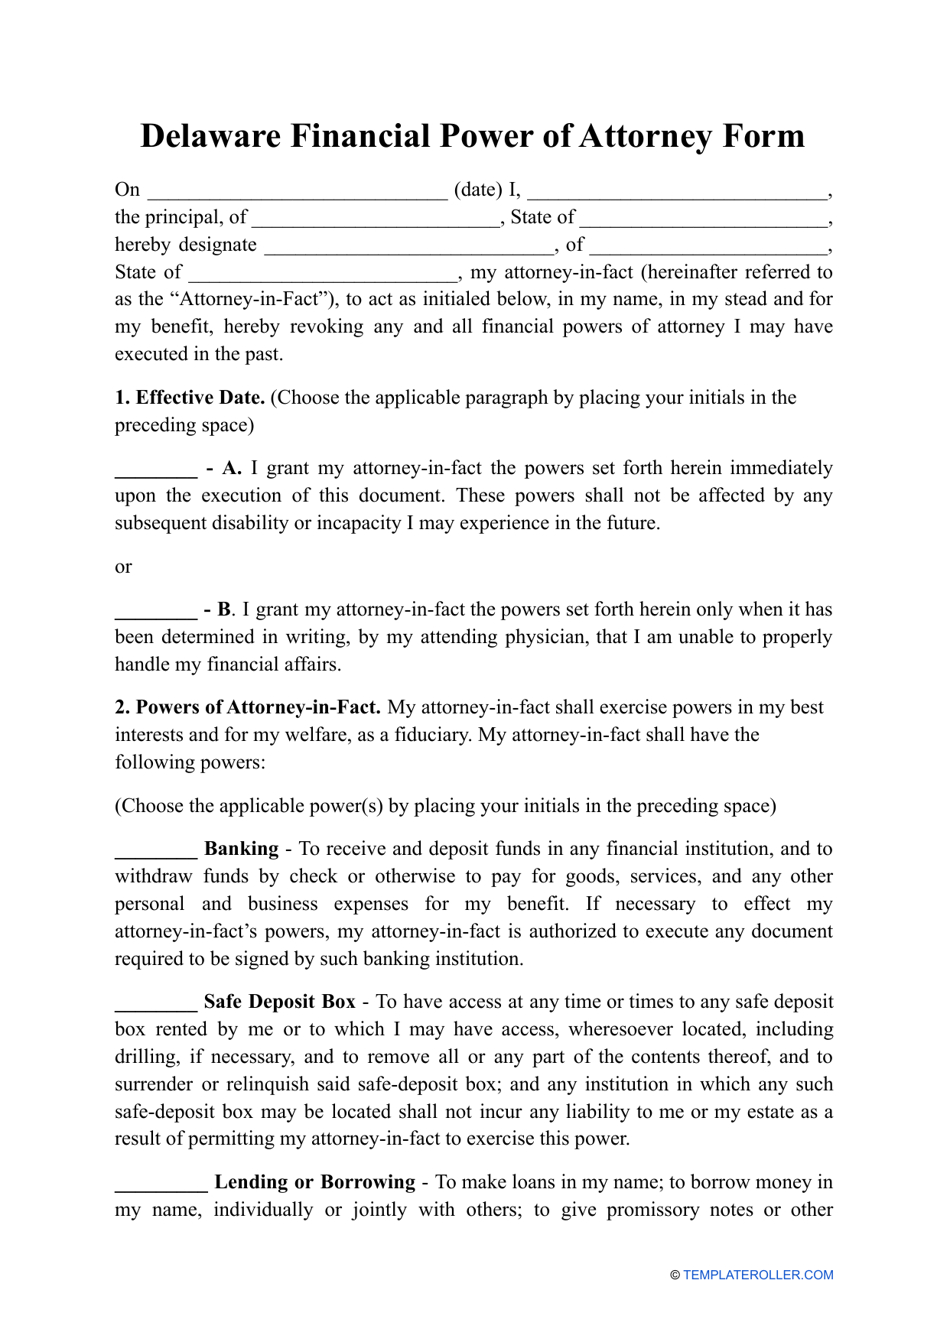 Financial Power of Attorney Form - Delaware, Page 1